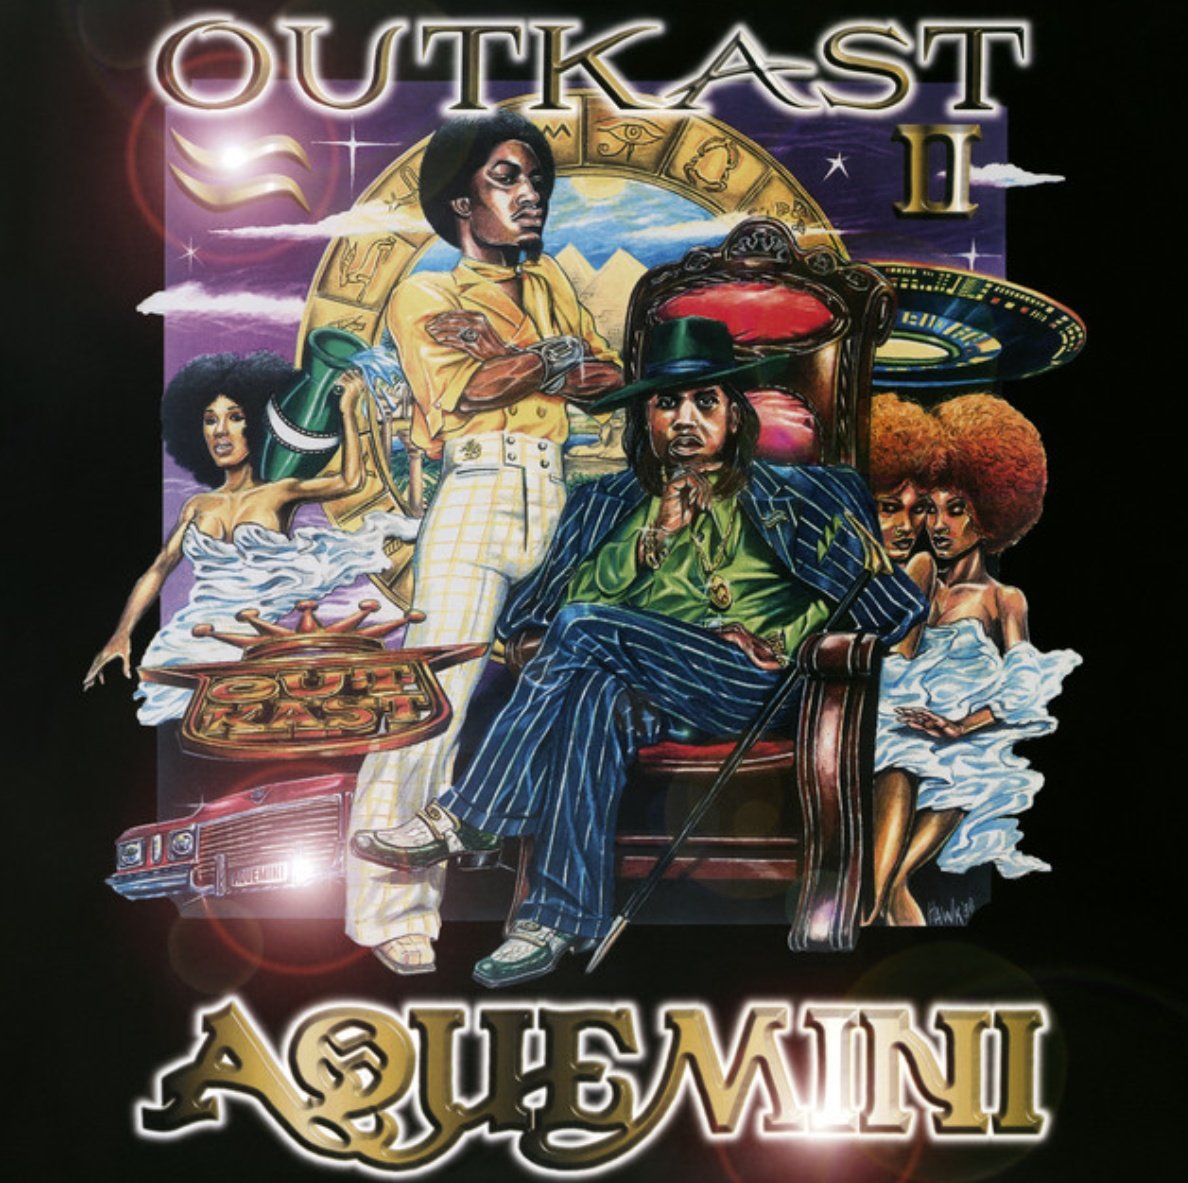 #8 - Aquemini This whole album has mastered an aquatic and exquisite aesthetic, the title track perfectly represents the brand of the album, as well as what these two are capable of. Big Boi's flows are dynamic and one of Dre's best verses land here.Best Performance: Andre